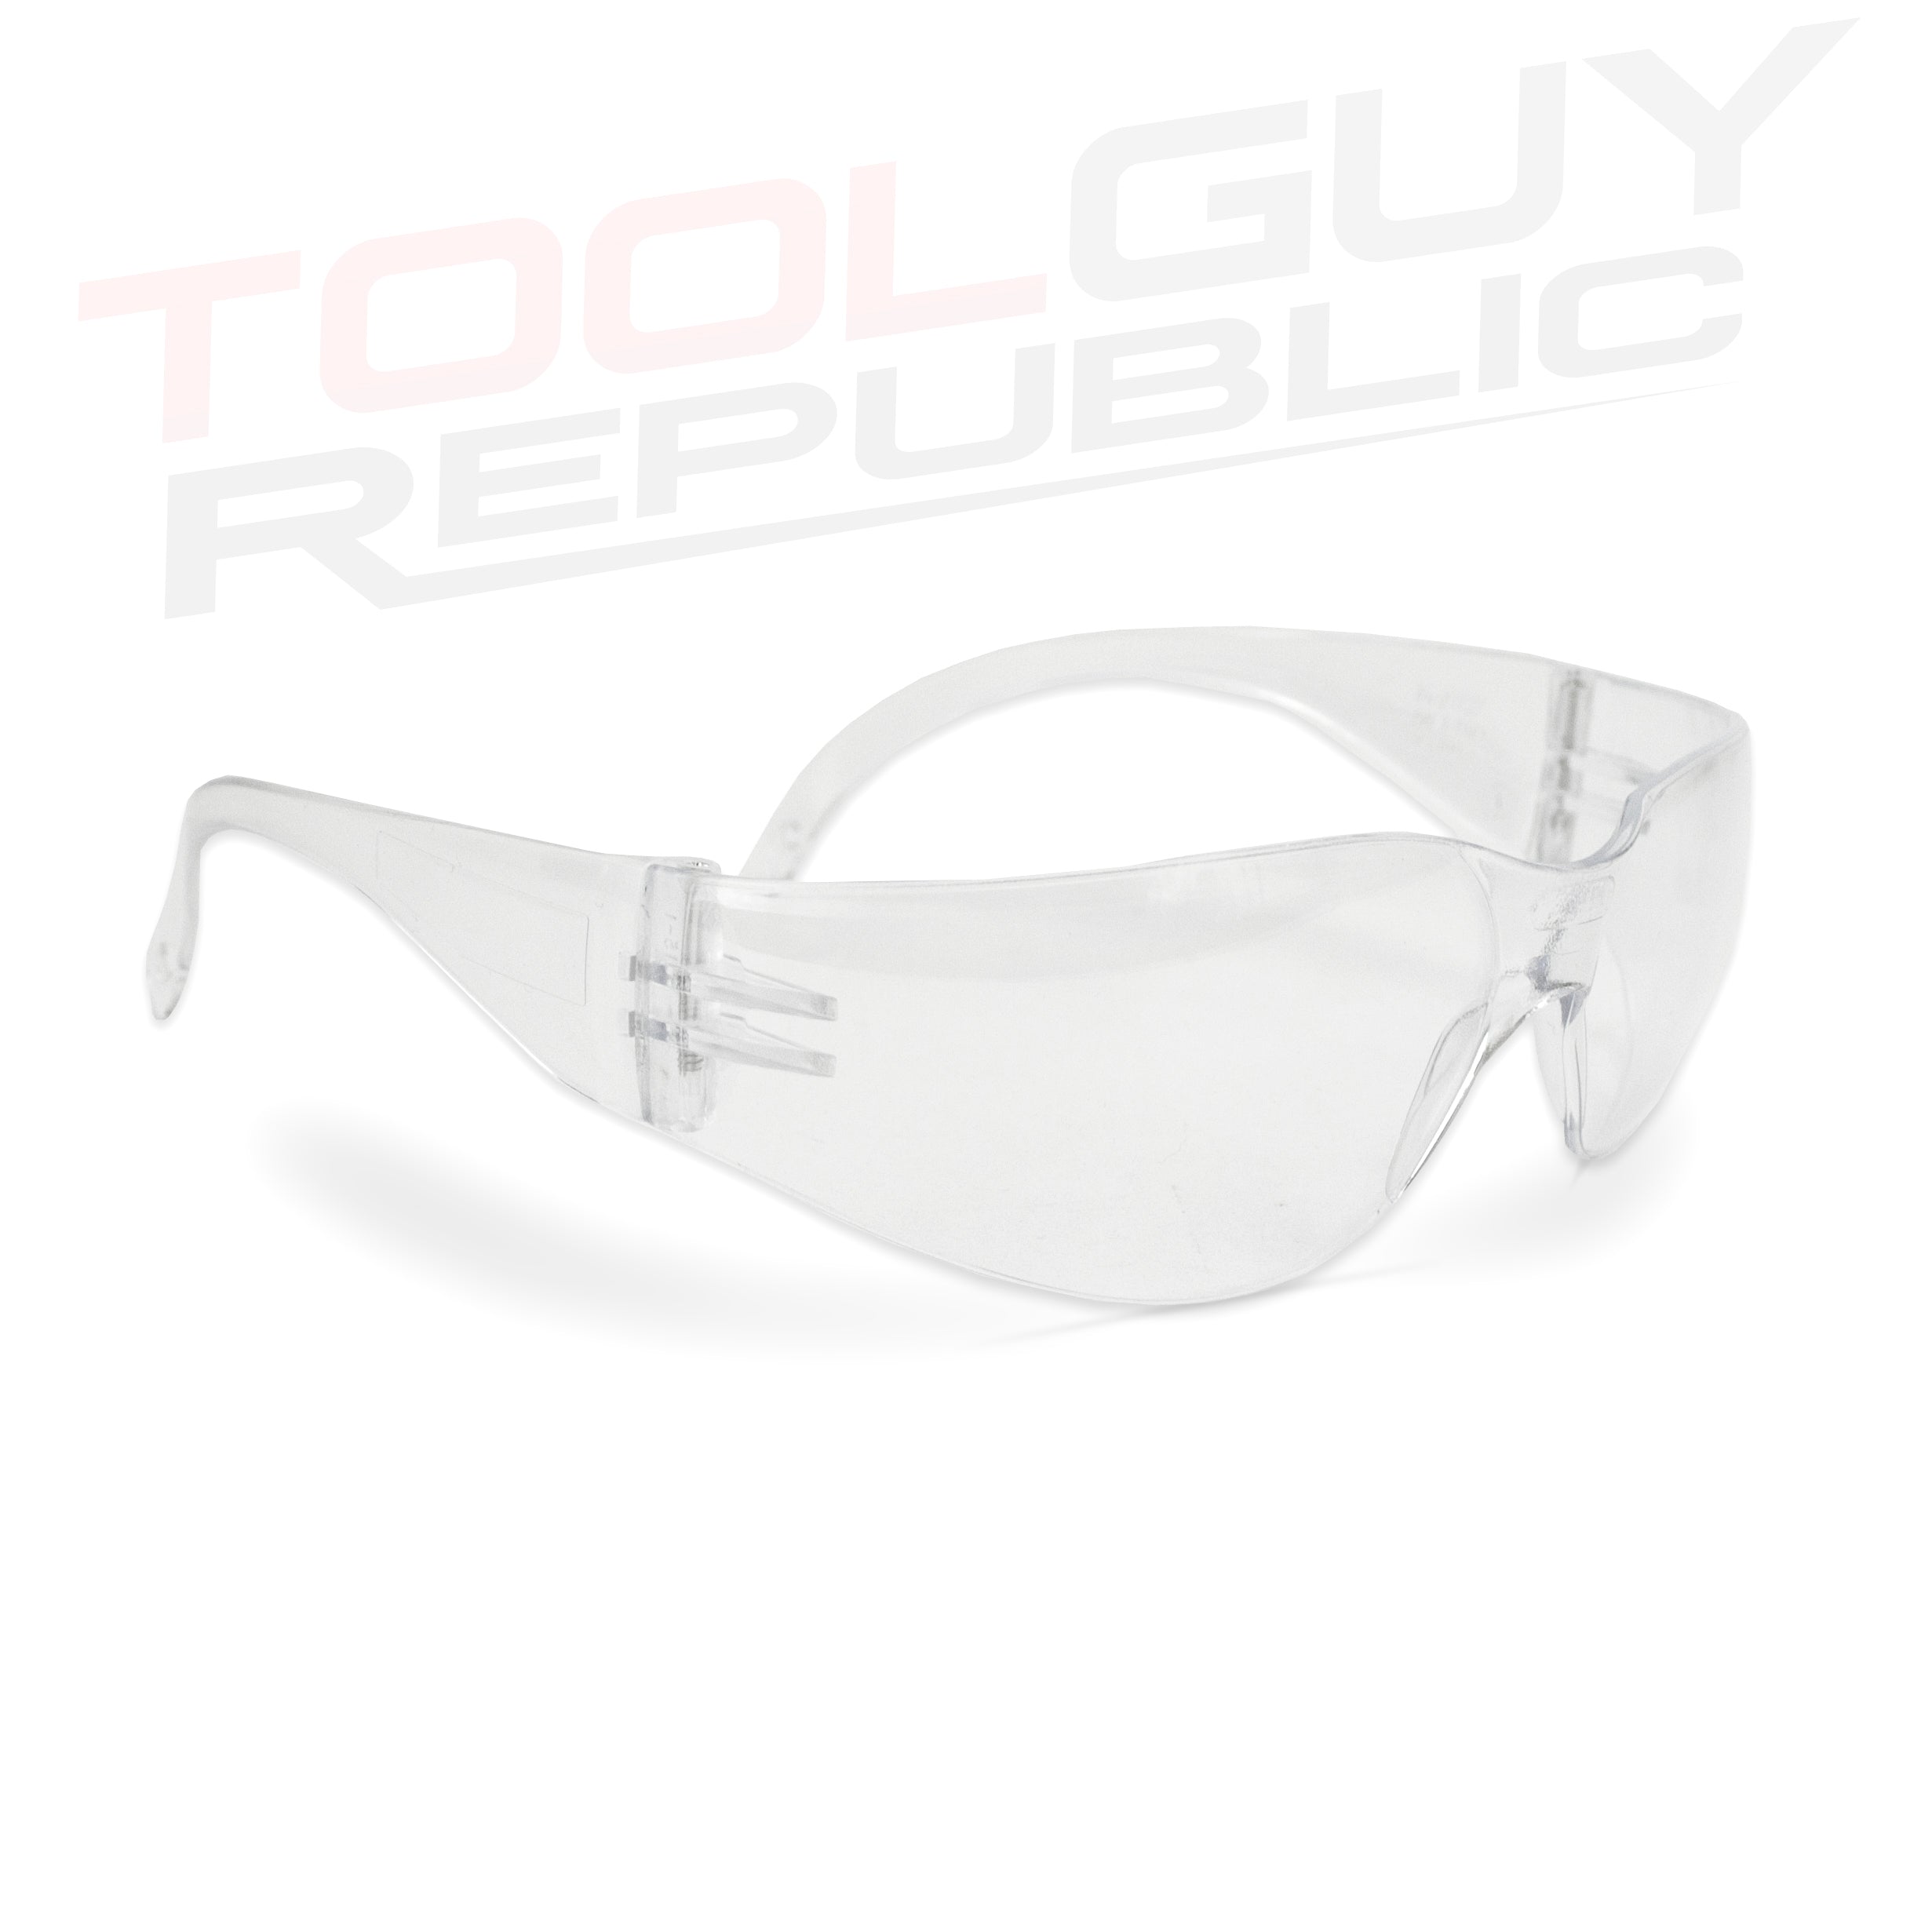 Clear Lens Safety Glasses - One Size - ANSI Z87+ COMPLIANT (12 Pair)